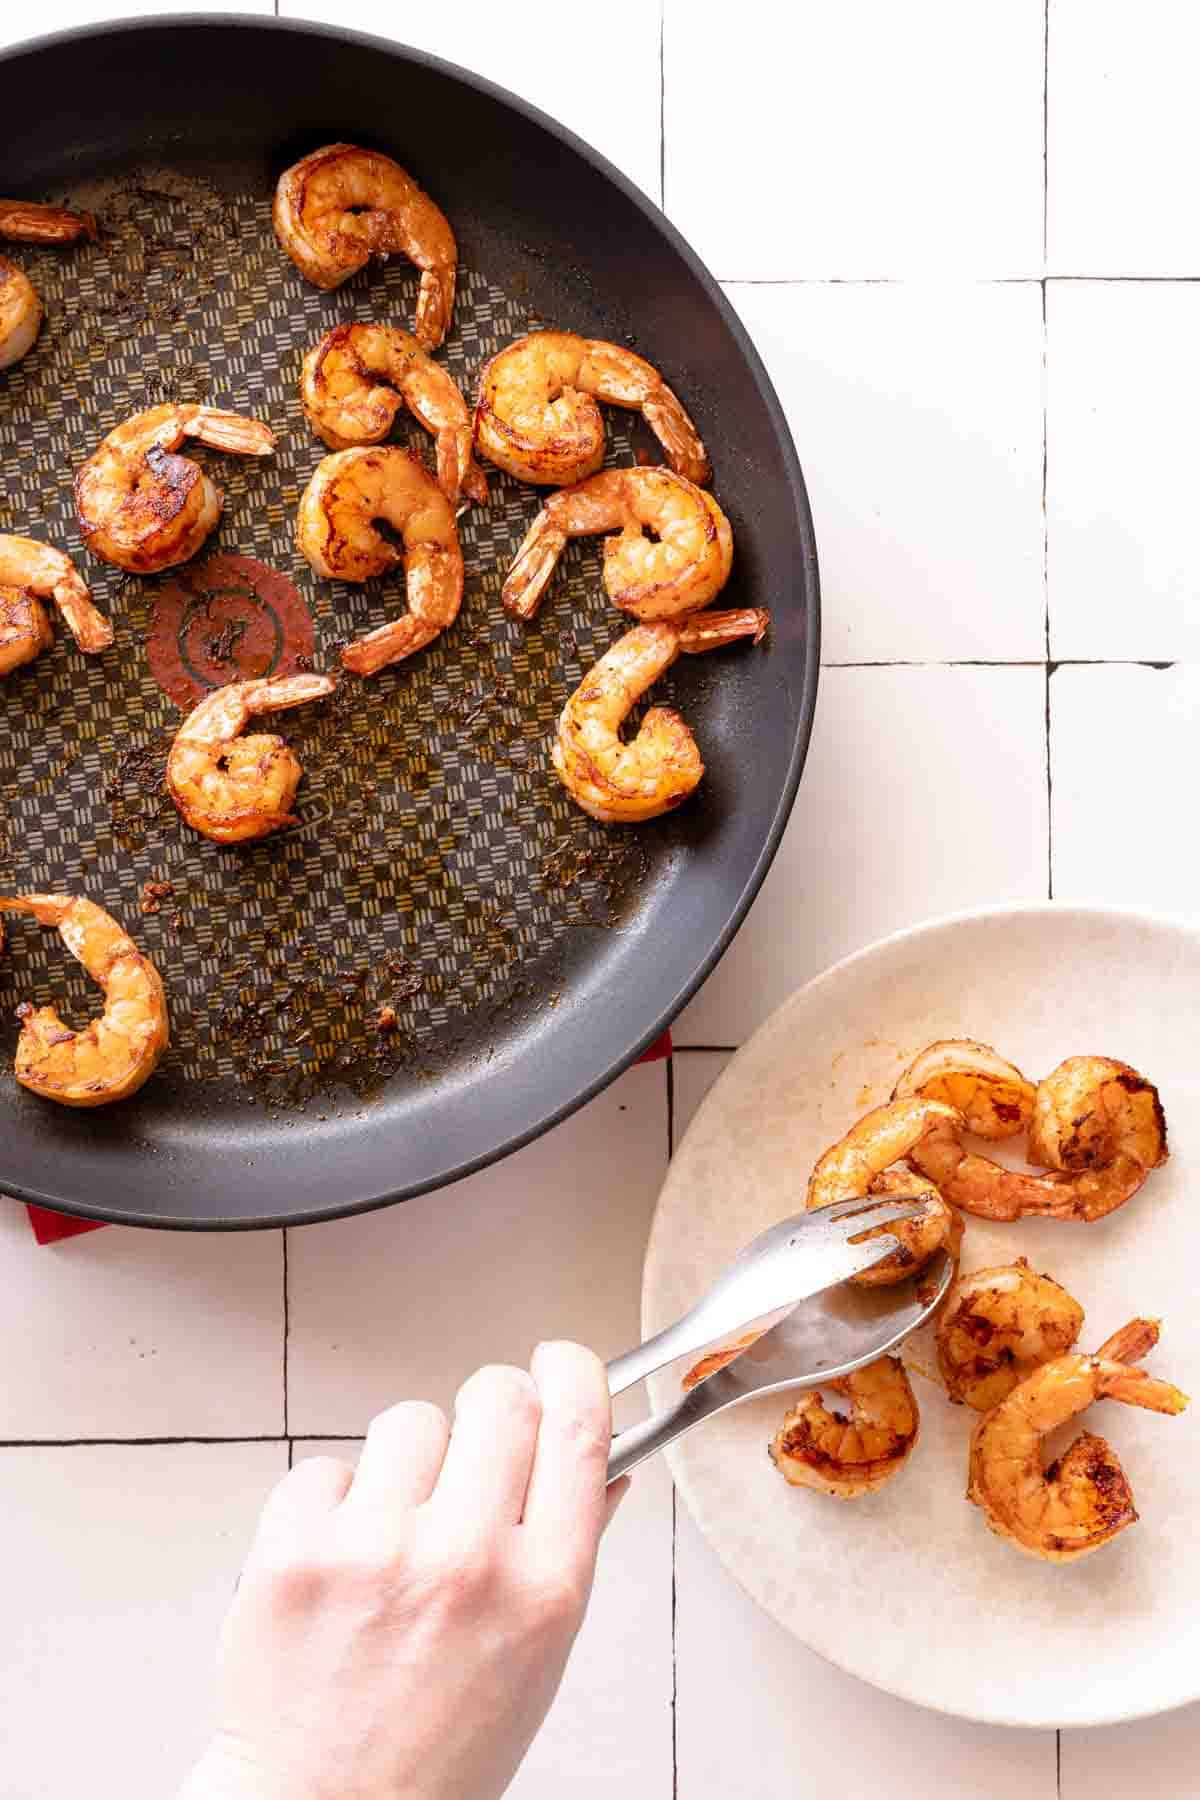 tongs moving shrimp from pan to plate.